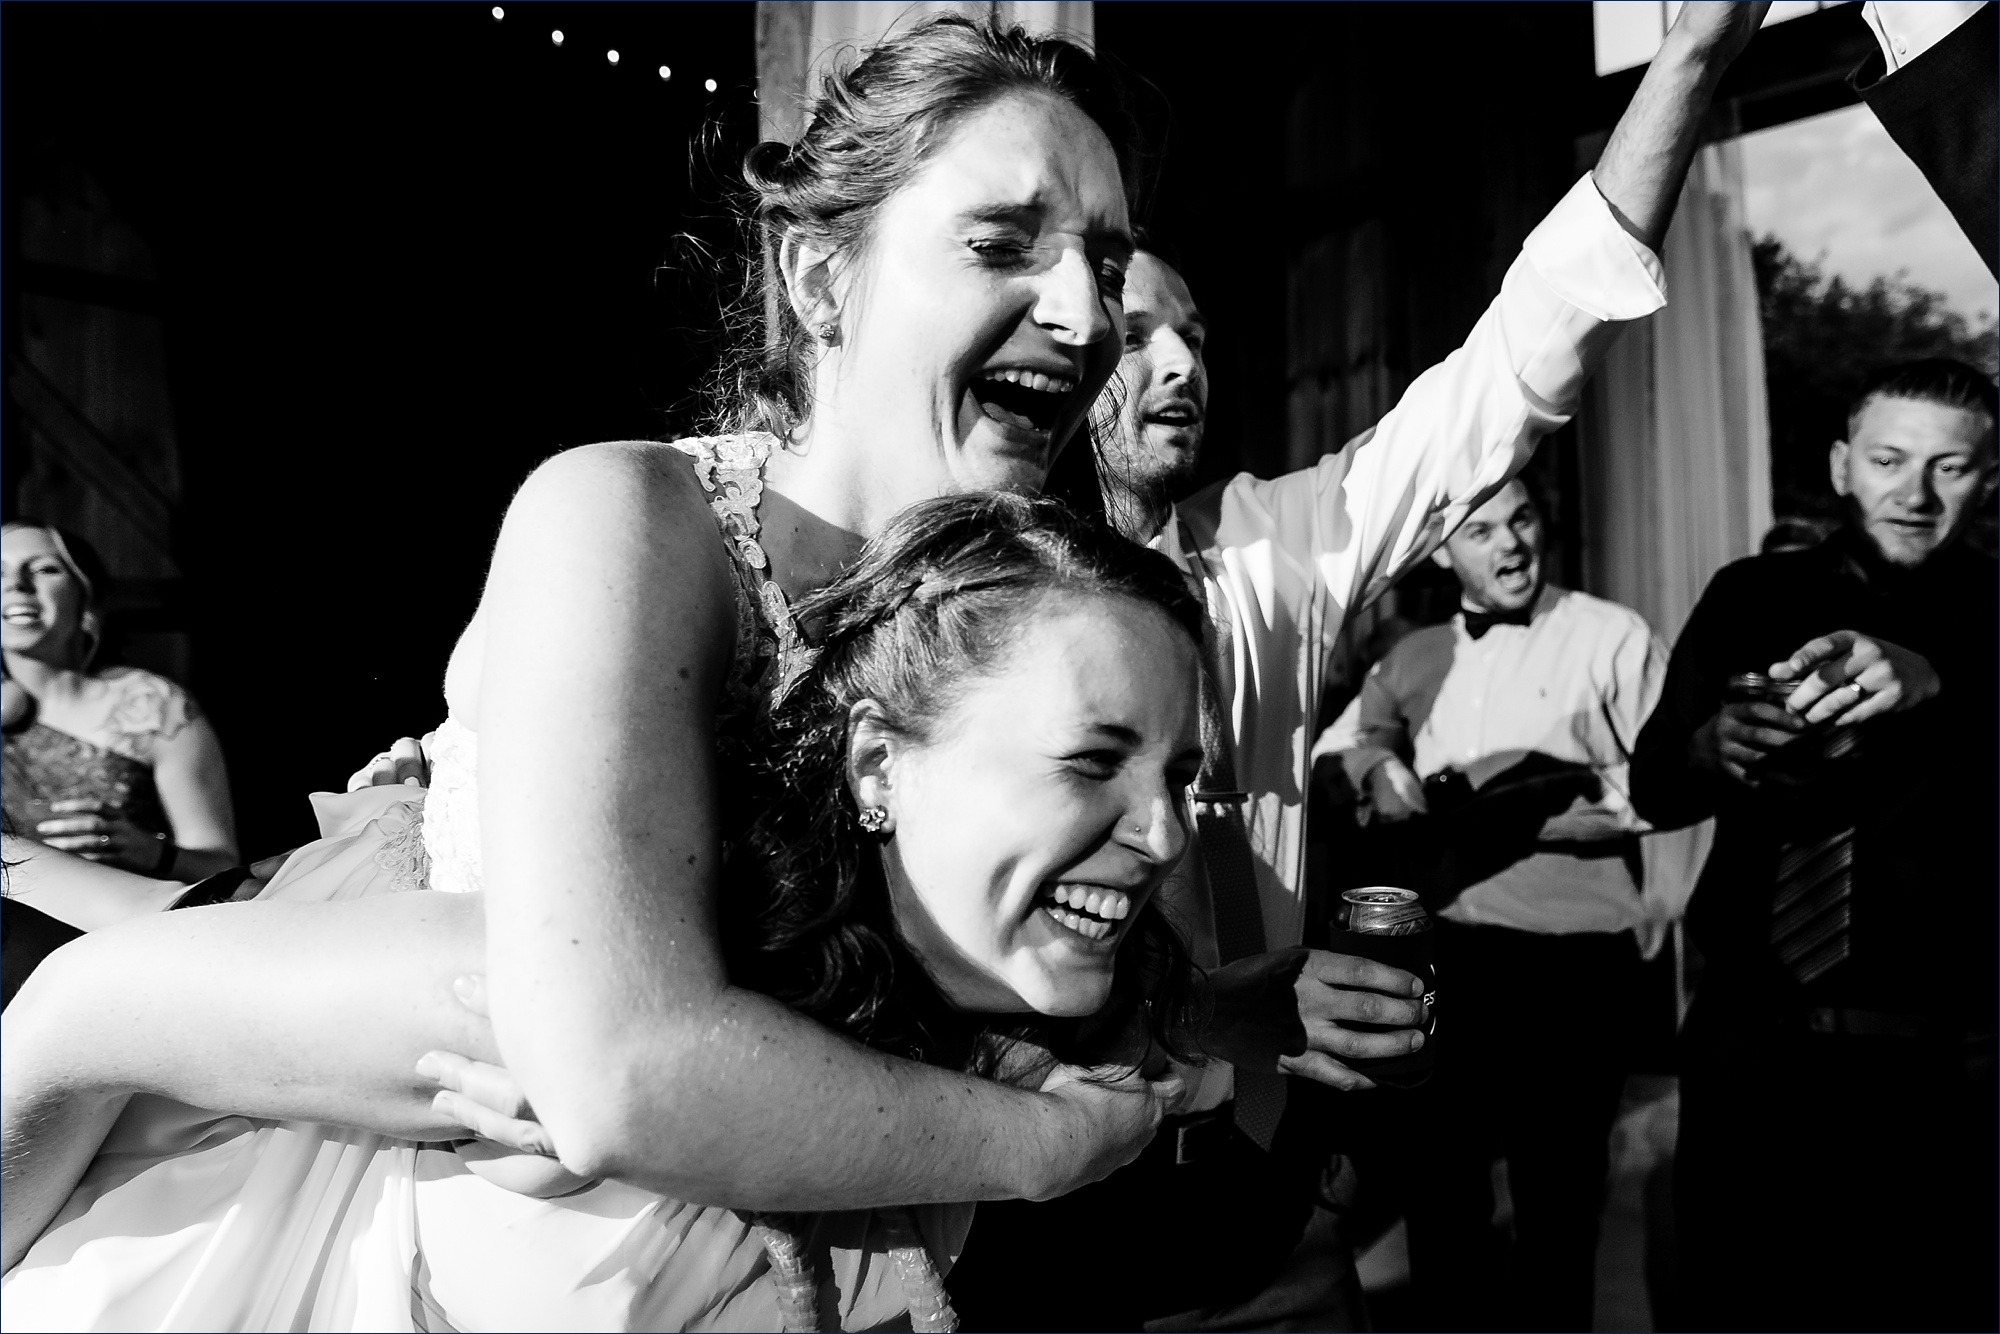 The bride plays chicken on her best friend's back at the wedding reception at Kitz Farm in NH